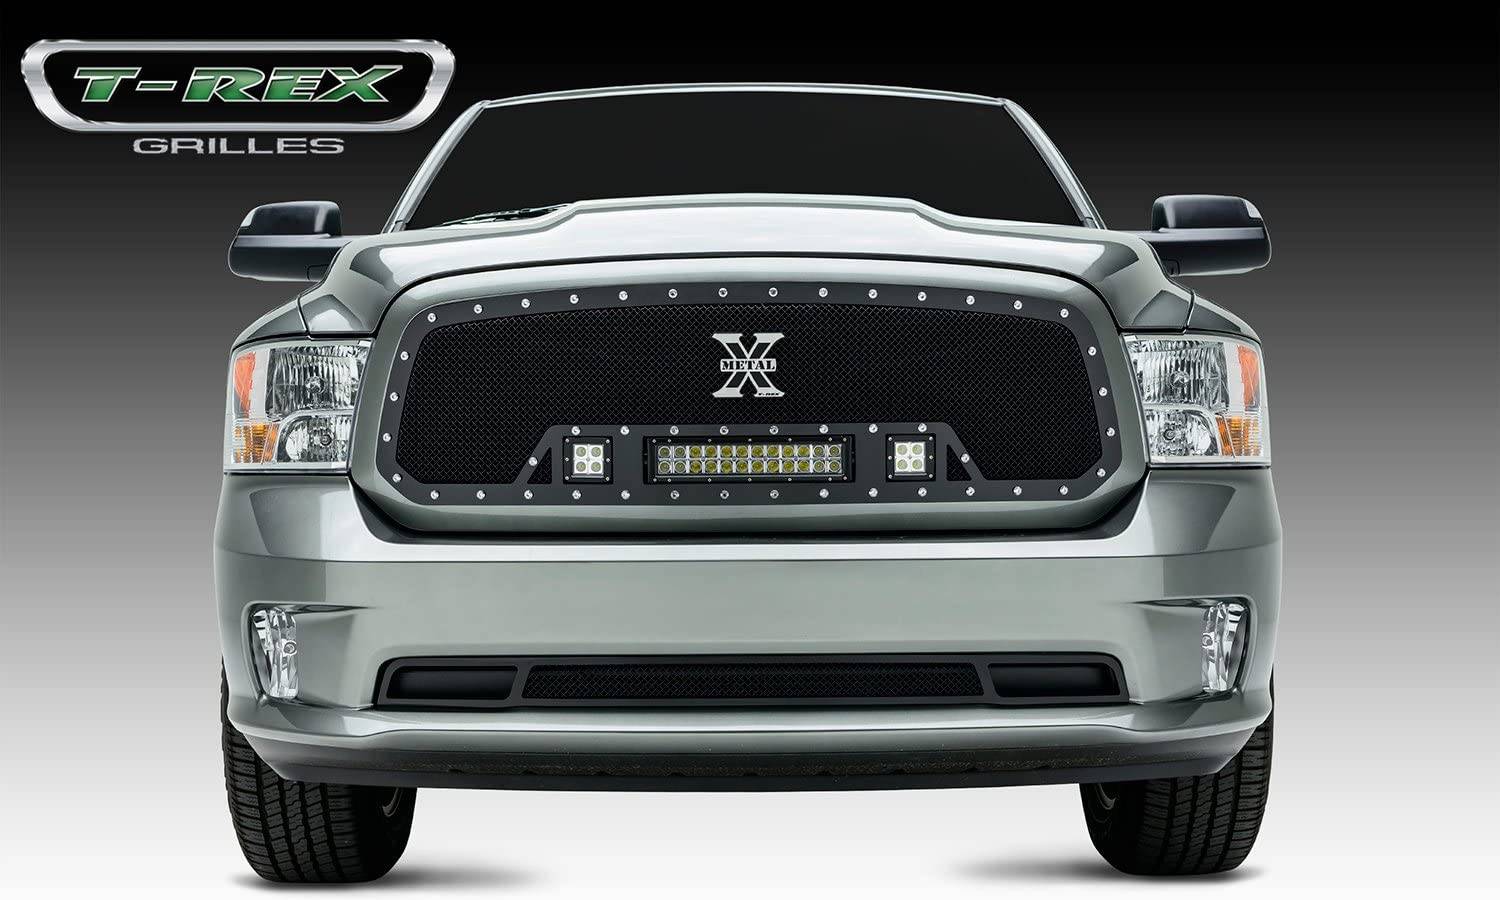 T-REX Grilles - 2009-2012 Ram 1500 Torch Grille, Black, 1 Pc, Insert, Chrome Studs, Incl. (2) 3" LED Cubes and (1) 12" LEDs - PN #6314571